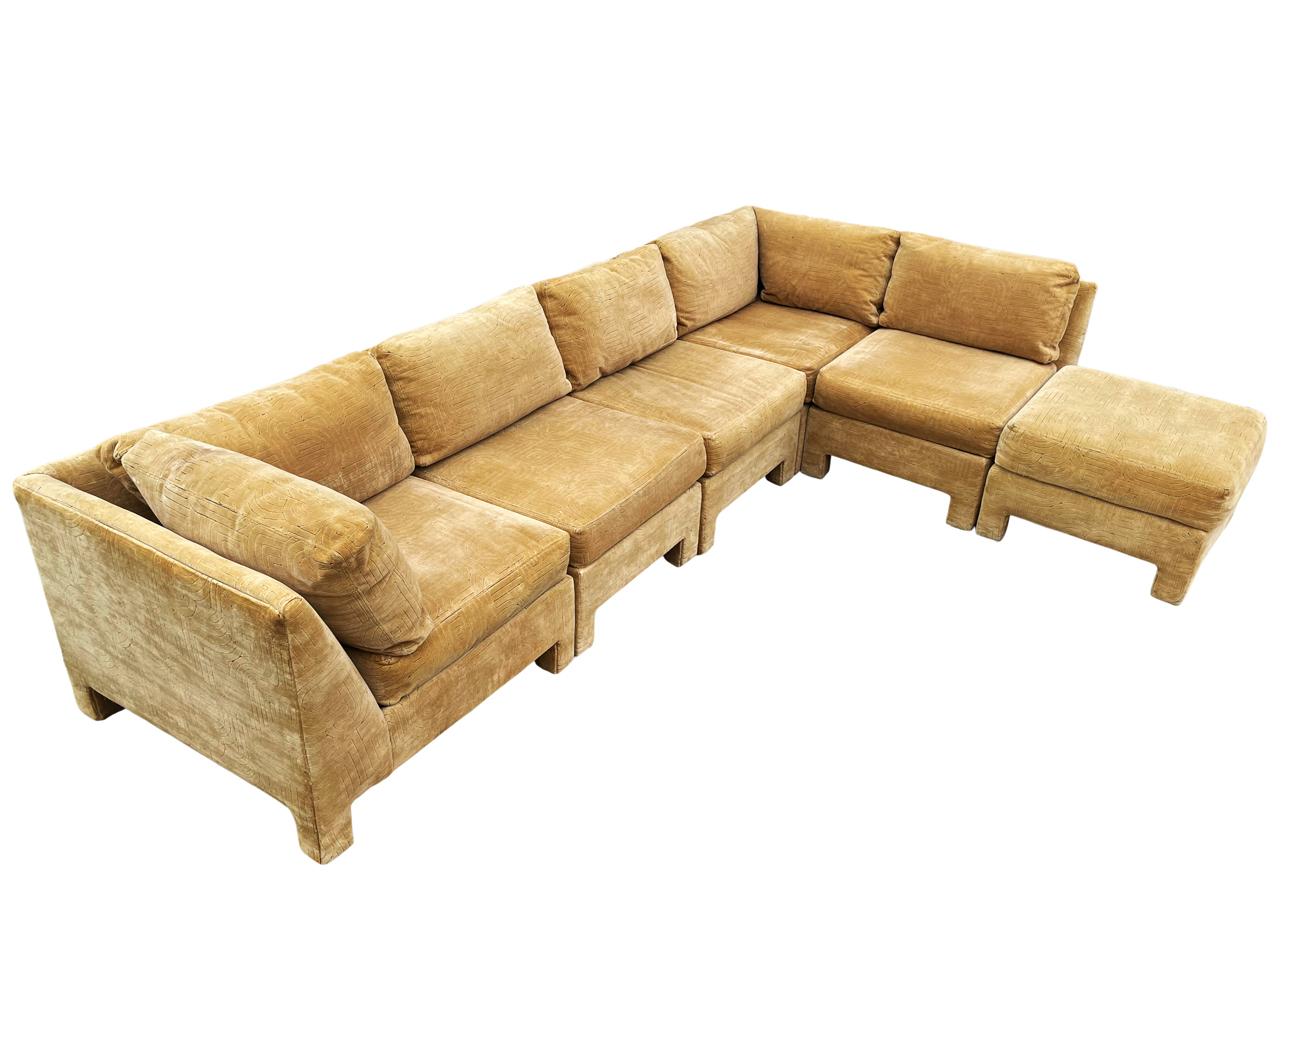 Late 20th Century Mid-Century Modern Sectional or Modular Parsons Sofa Set by Selig with Ottoman